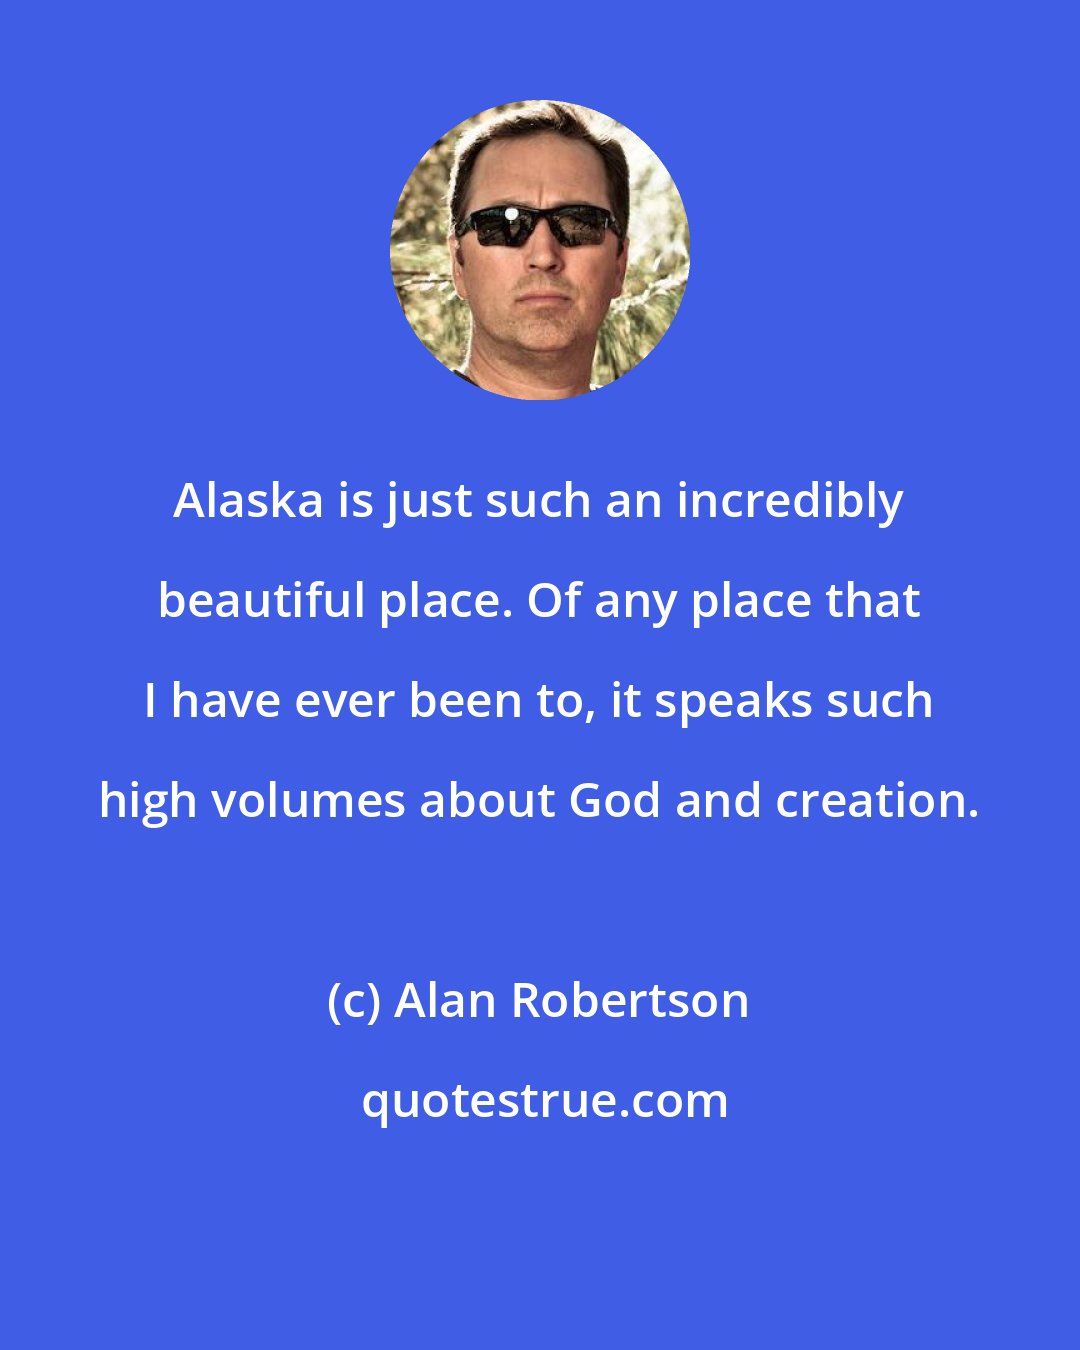 Alan Robertson: Alaska is just such an incredibly beautiful place. Of any place that I have ever been to, it speaks such high volumes about God and creation.